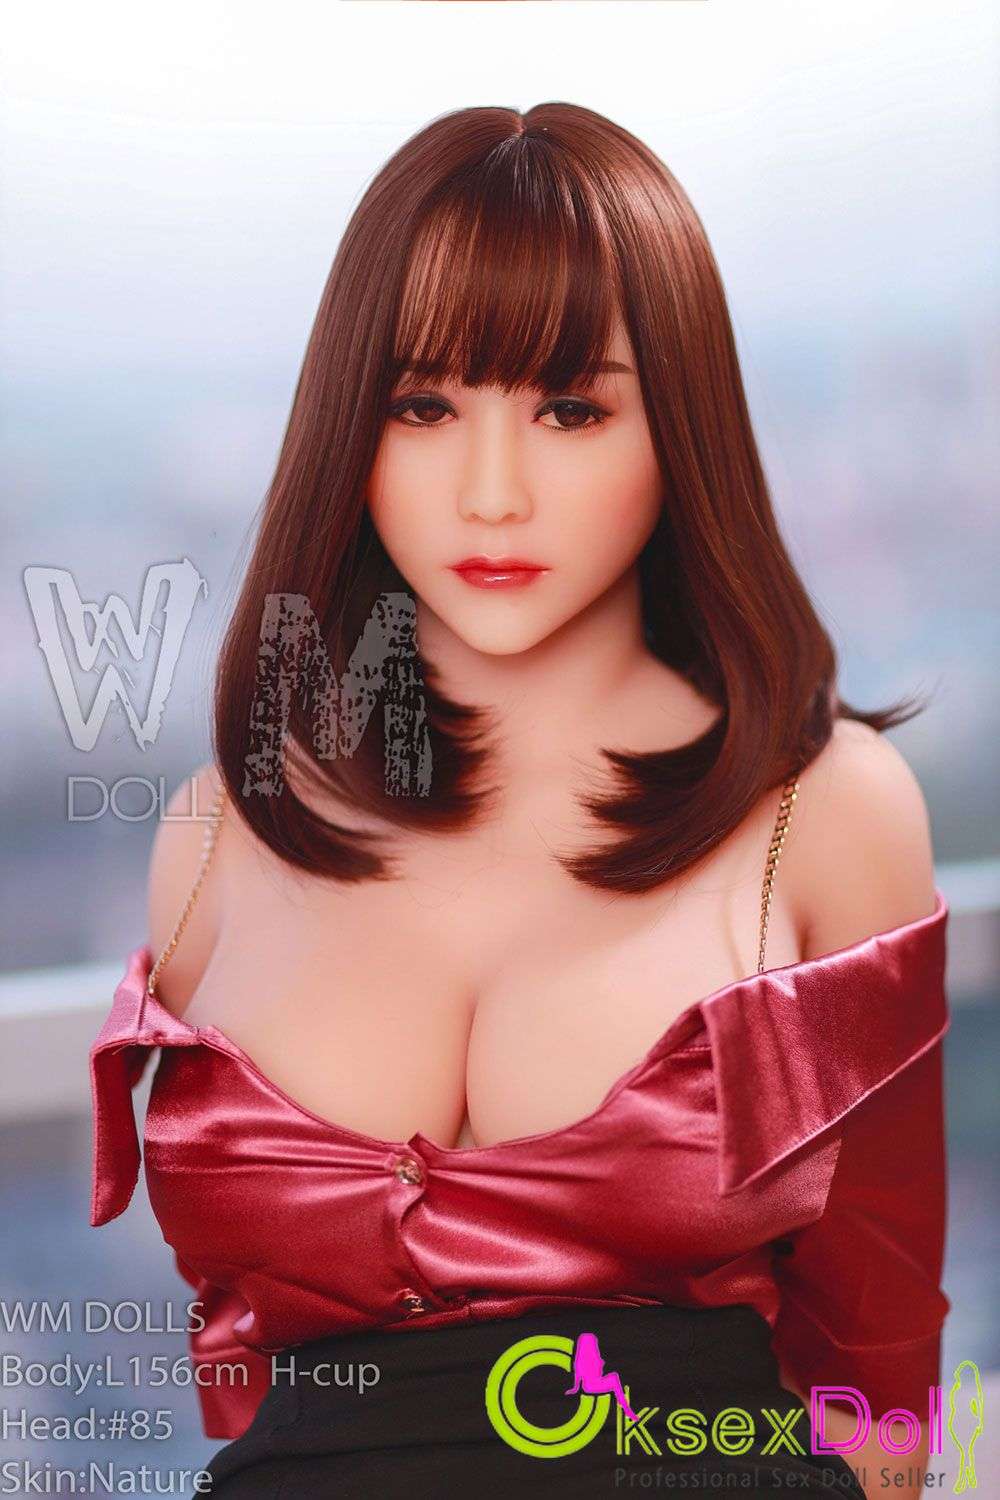 Kimi 156cm Busty Japanese Women H-cup TPE Sex Doll Gallery